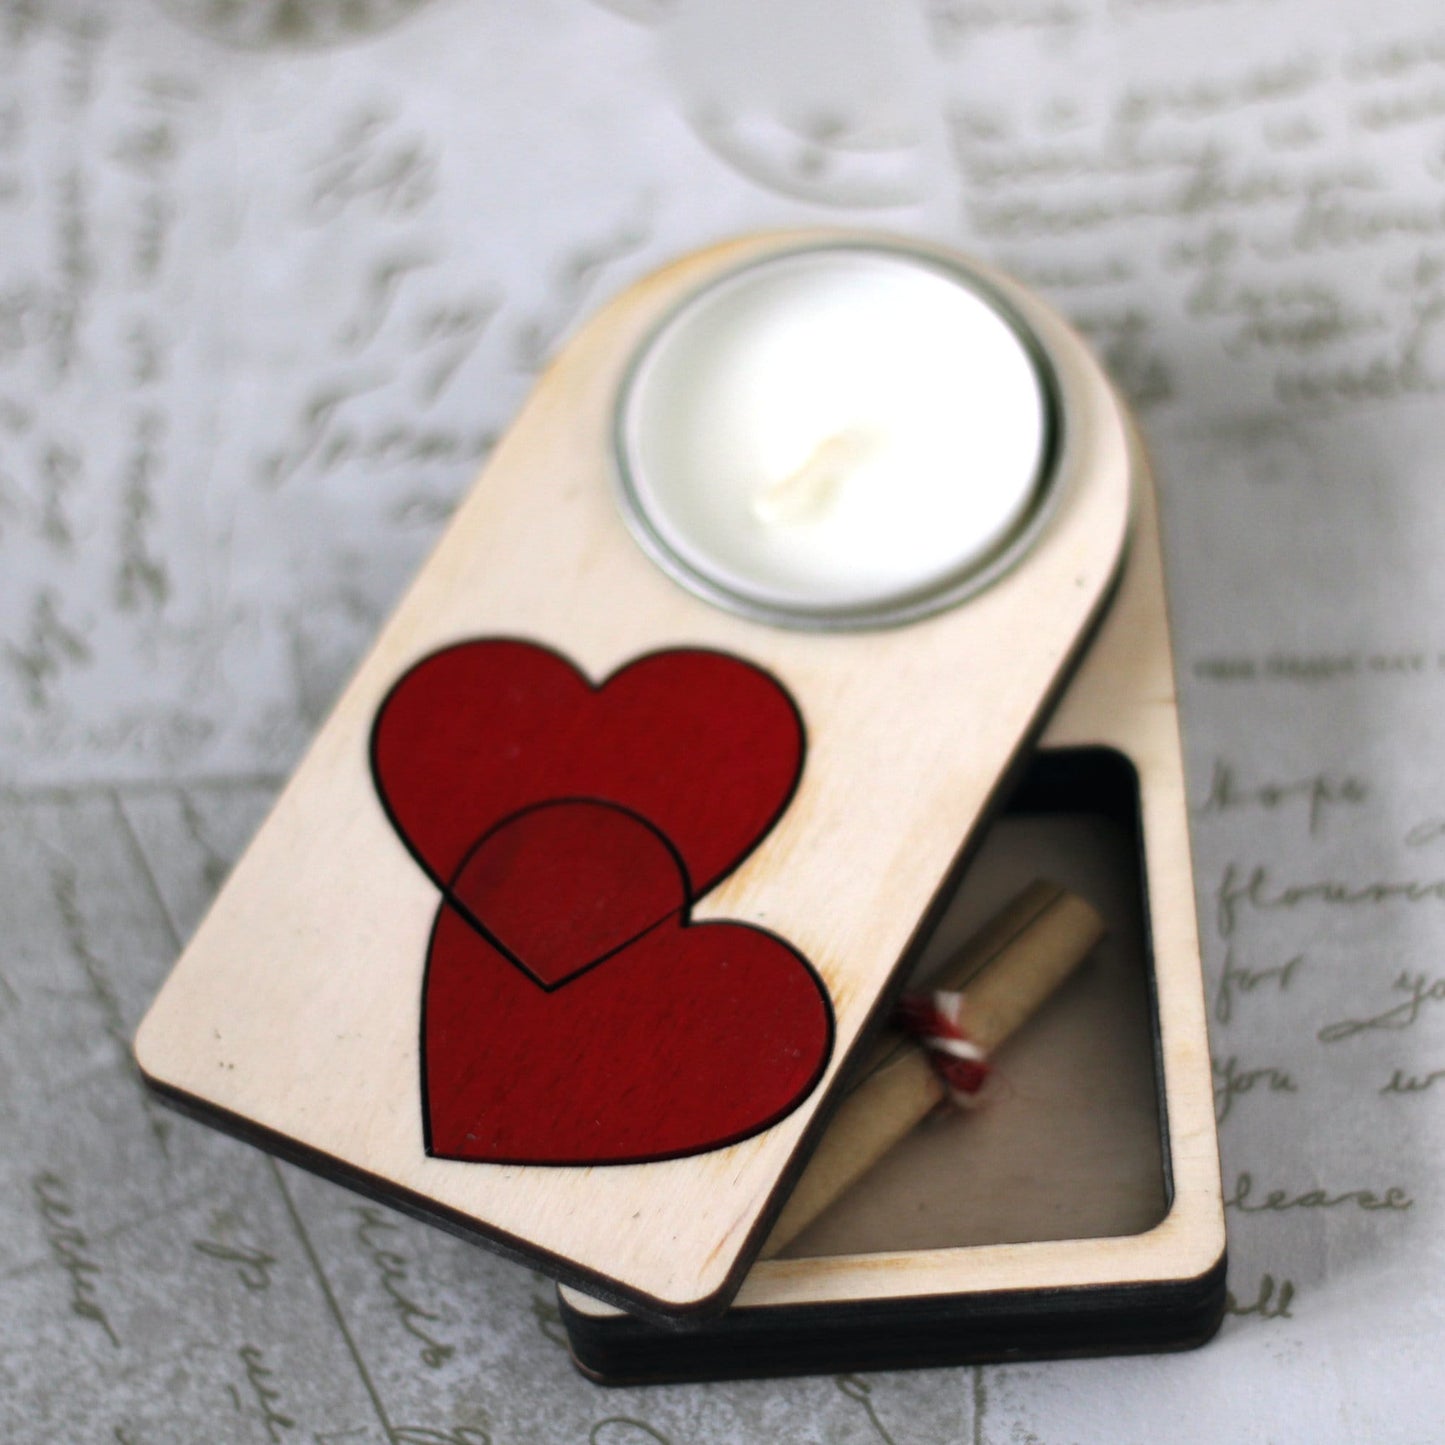 Engraved wooden candle holder with entwined hearts motif and secret compartment, it holds tea light candle or nightlight